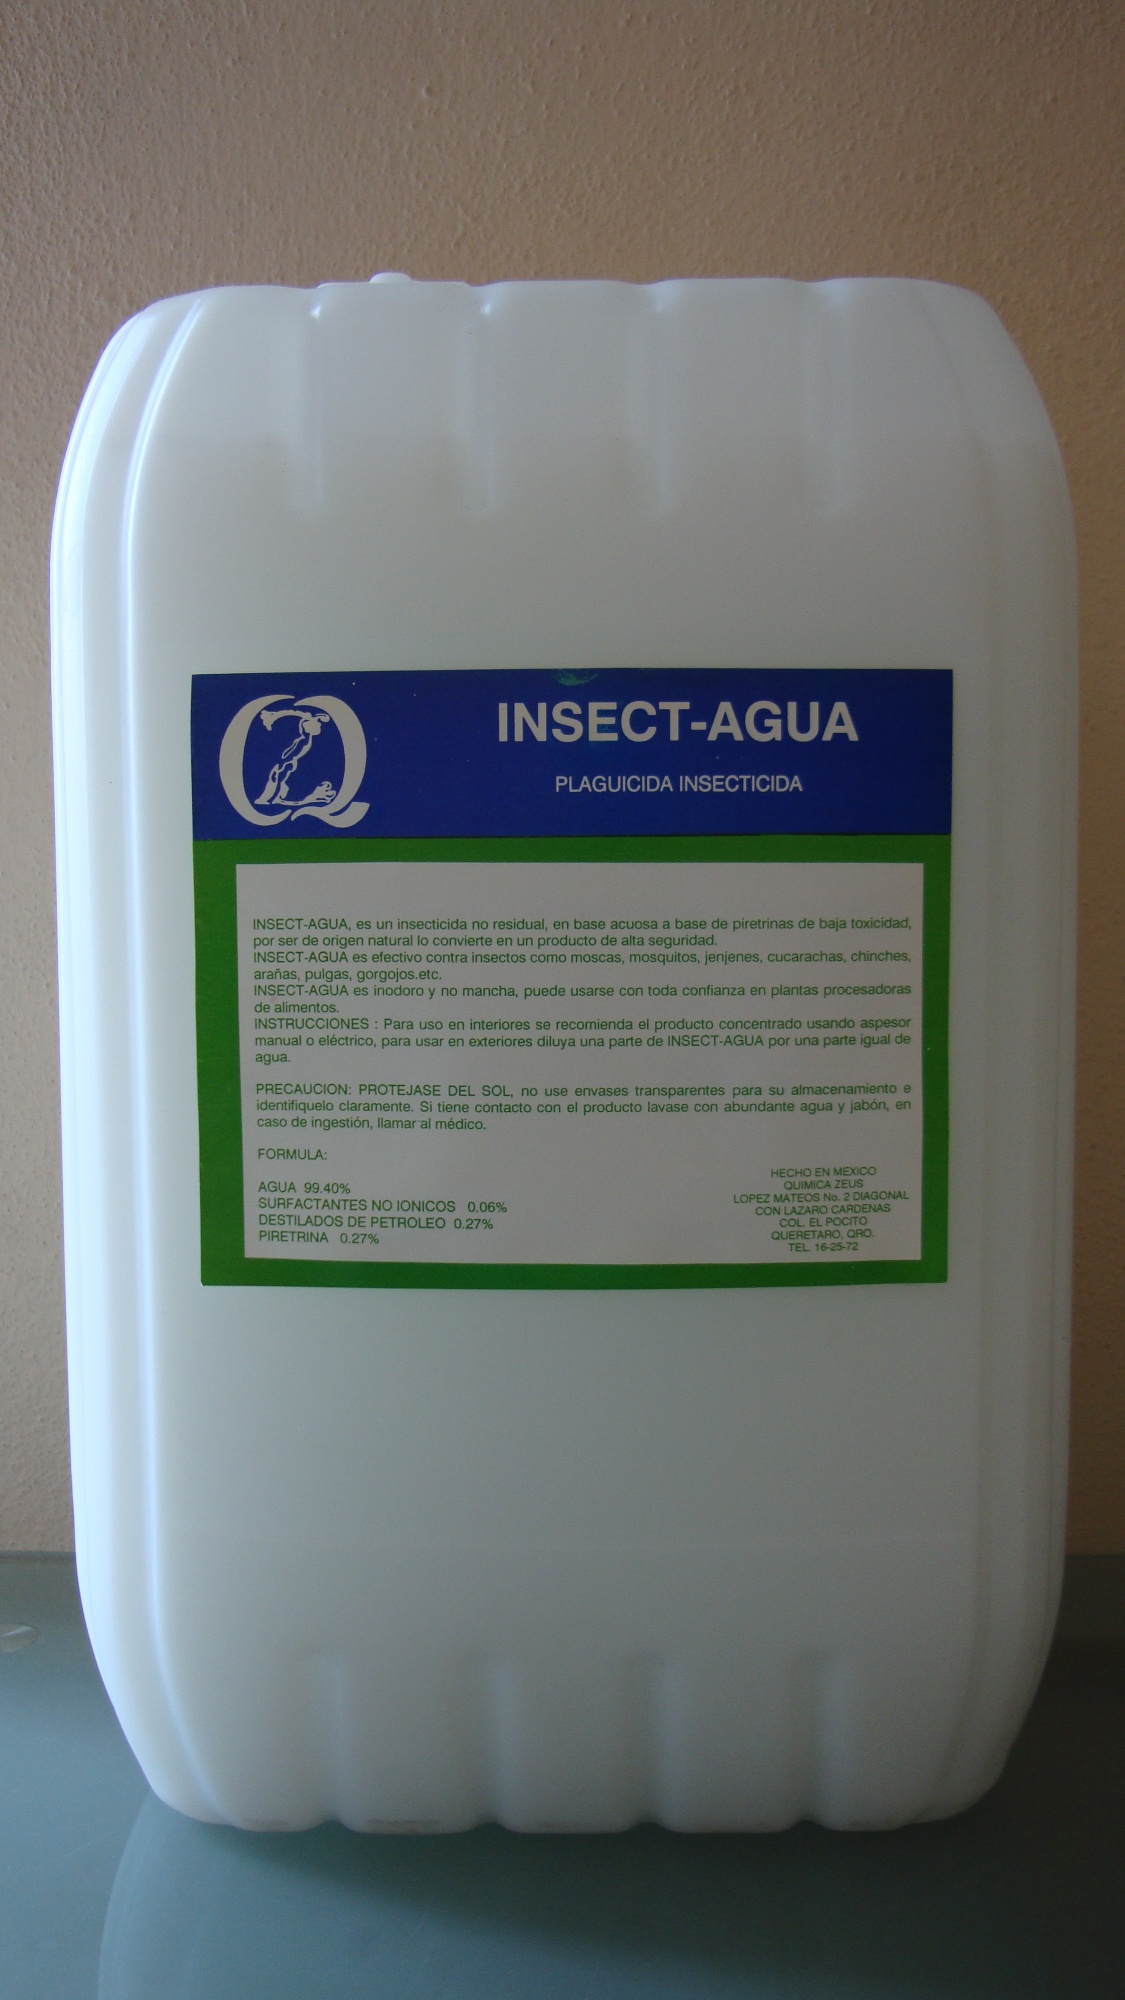 INSECT-AGUA